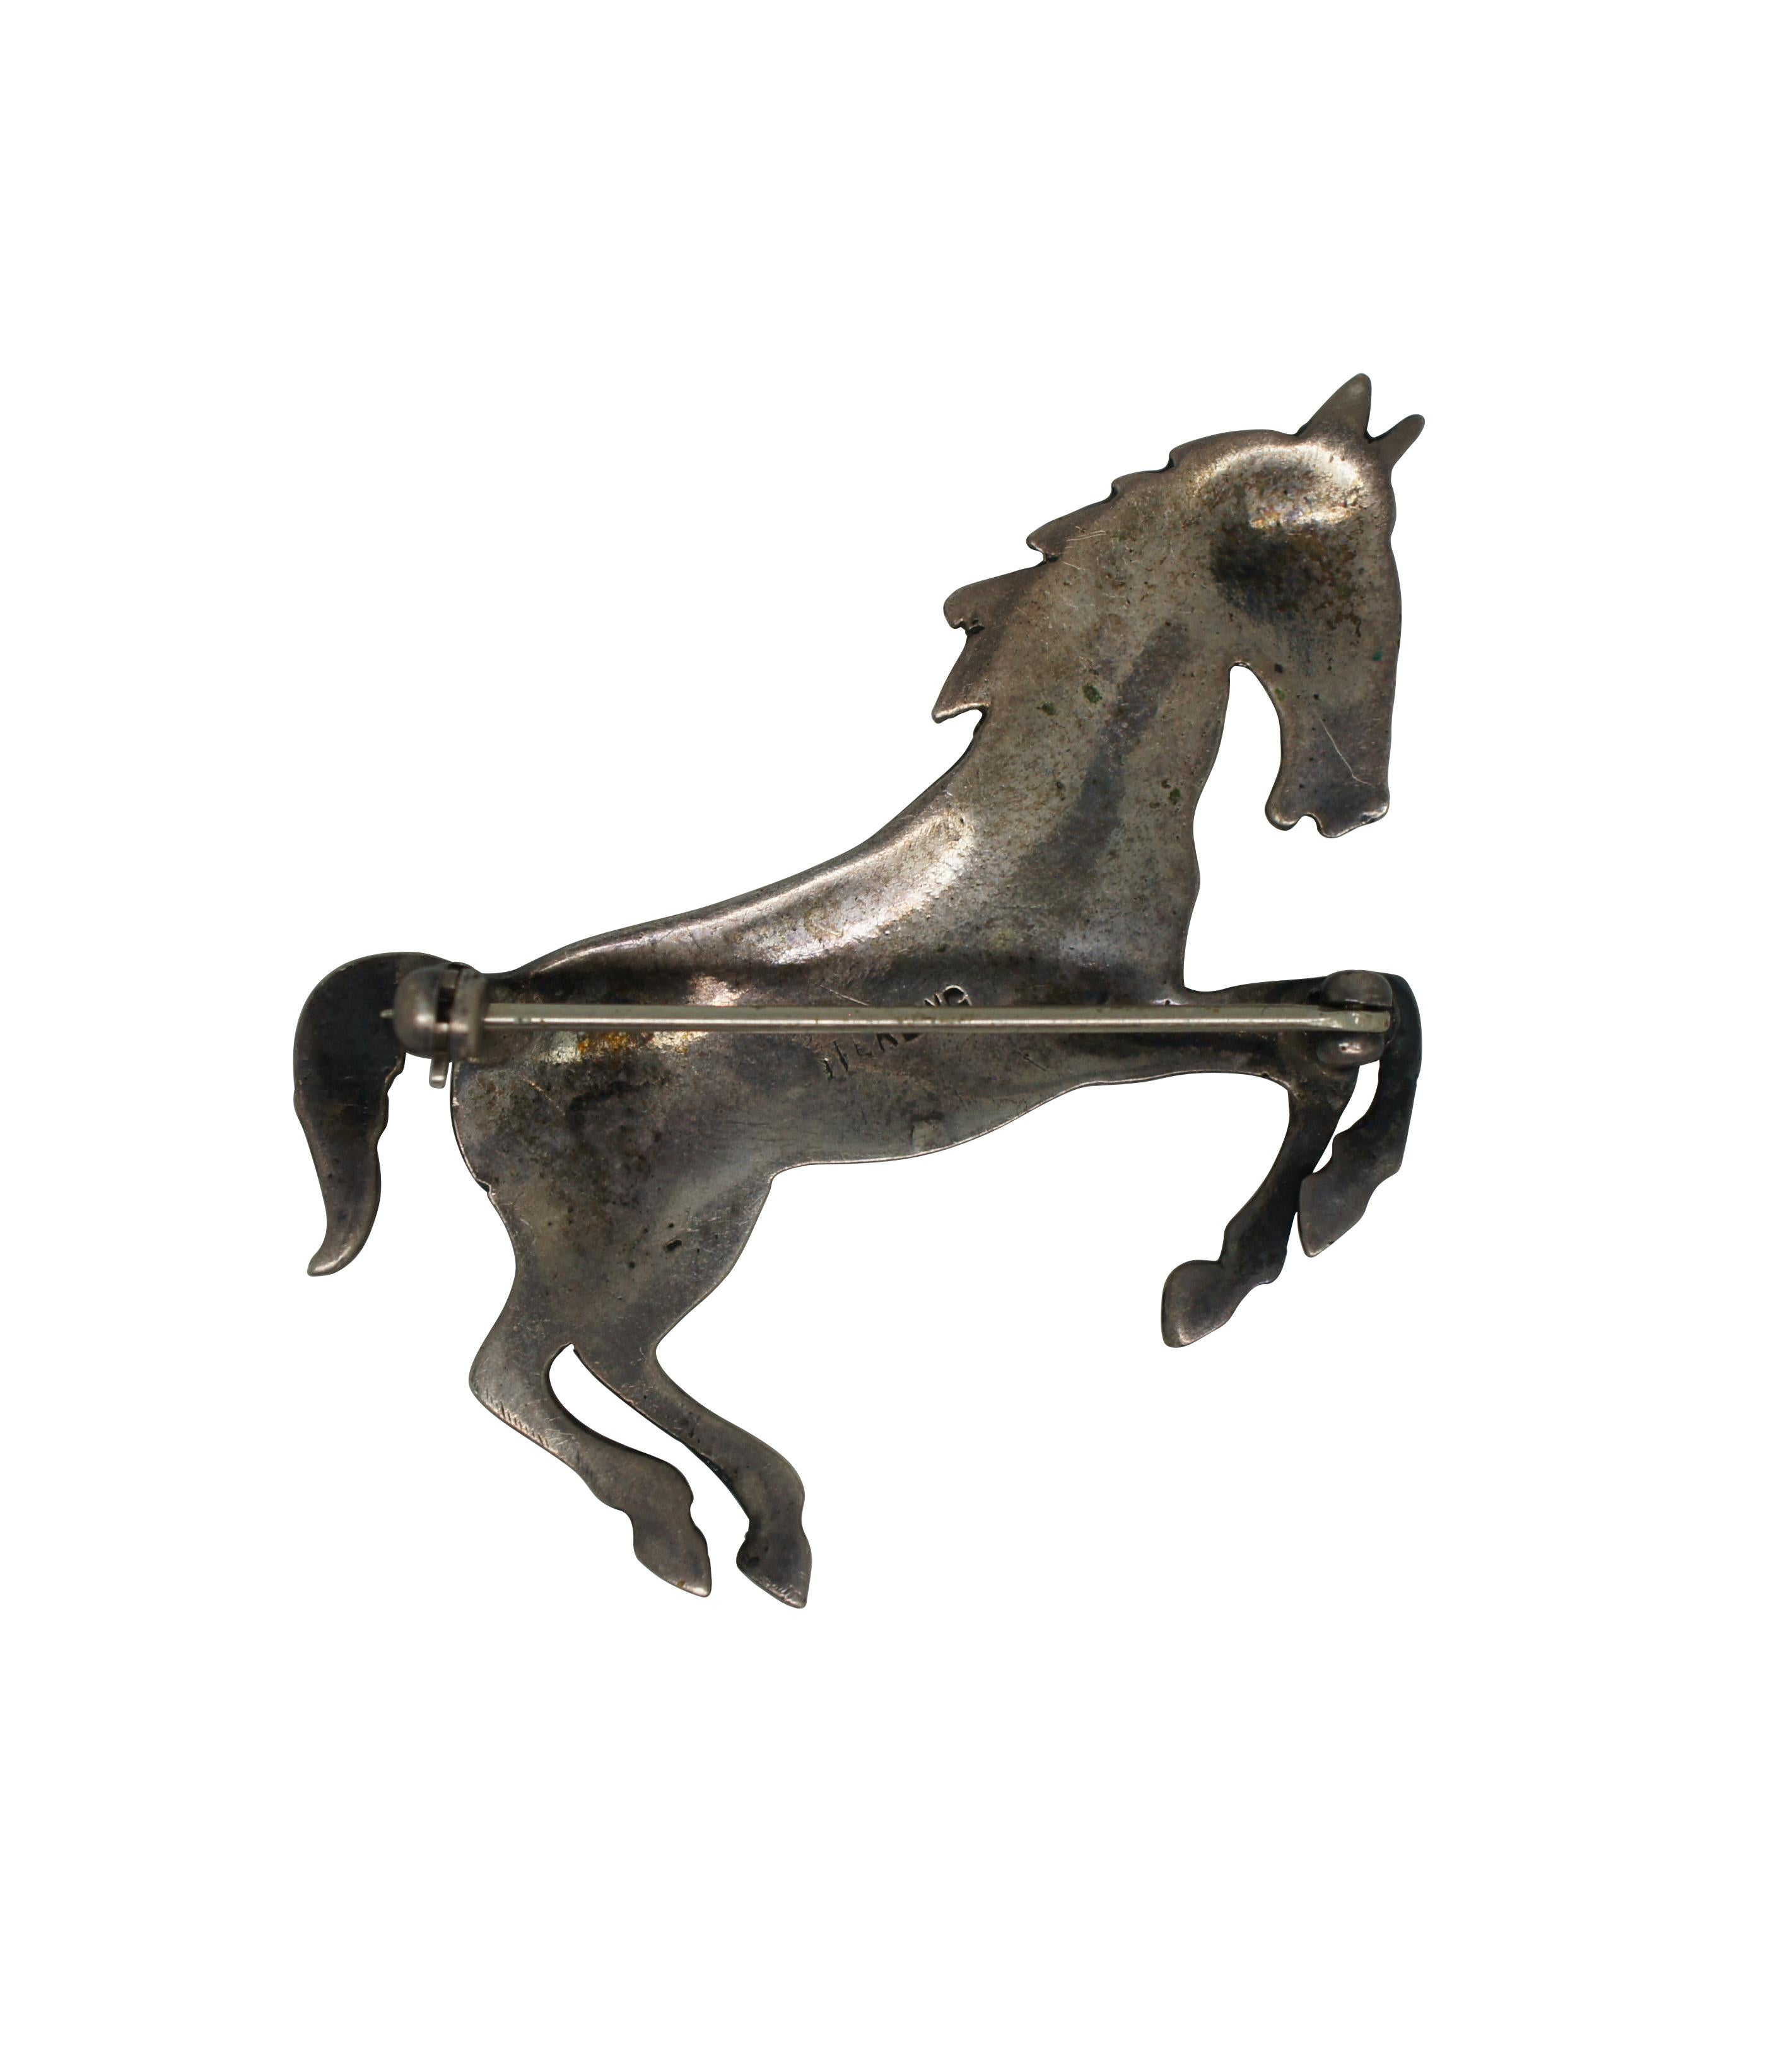 Vintage sterling silver pin / brooch in the shape of a rearing or galloping horse. Marked Sterling on verso with straight pin back.

Dimensions:
2” x 0.125” x 1.25” (Width x Depth x Height) / 8.3 g